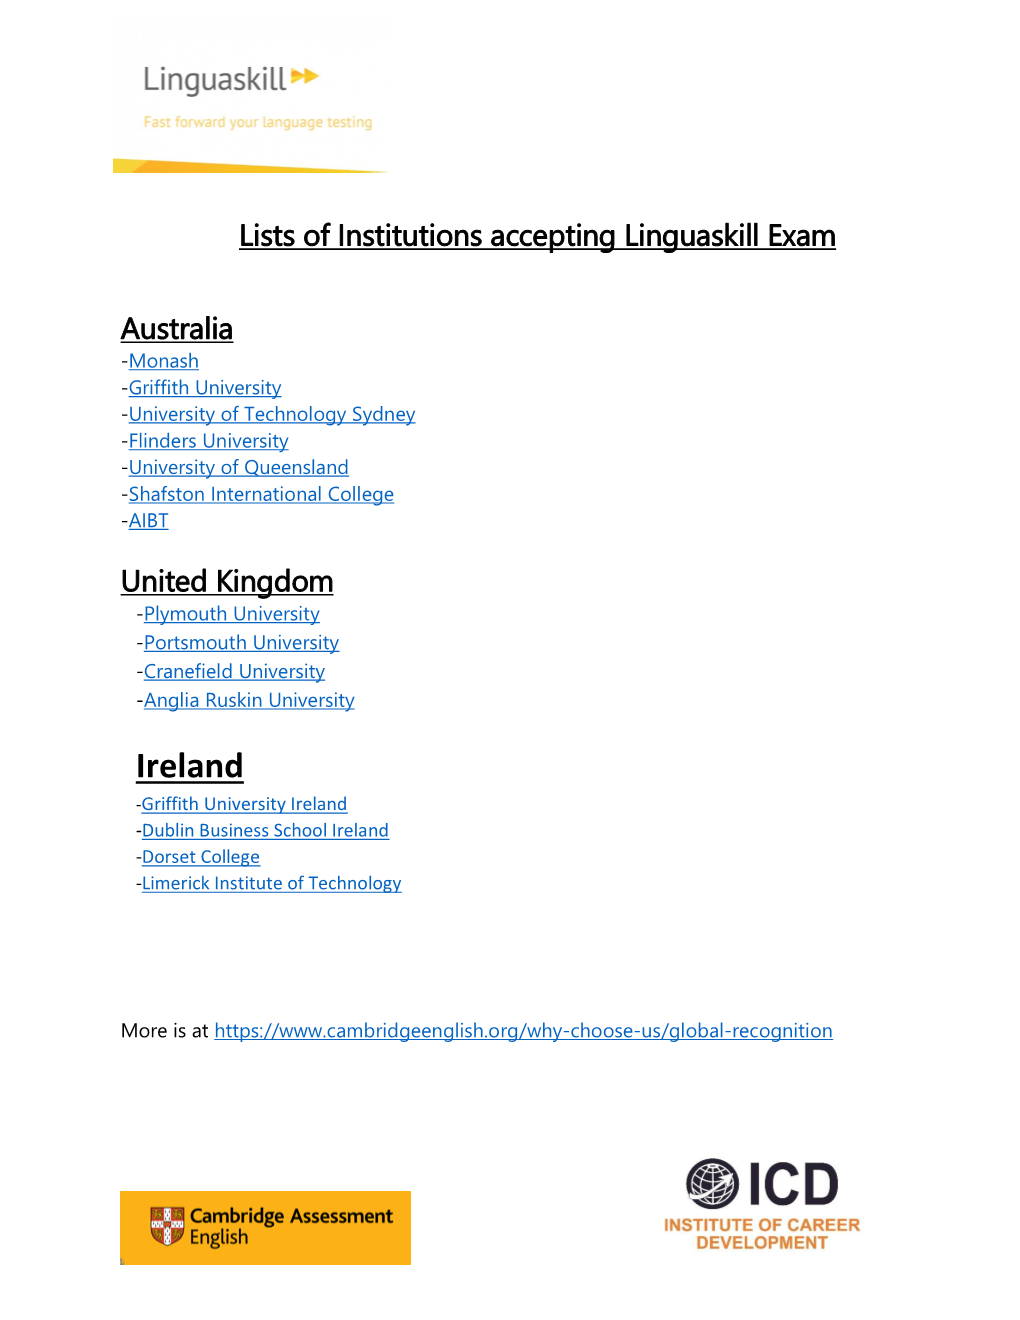 Lists of Institutions Accepting TOEFL Home Edition